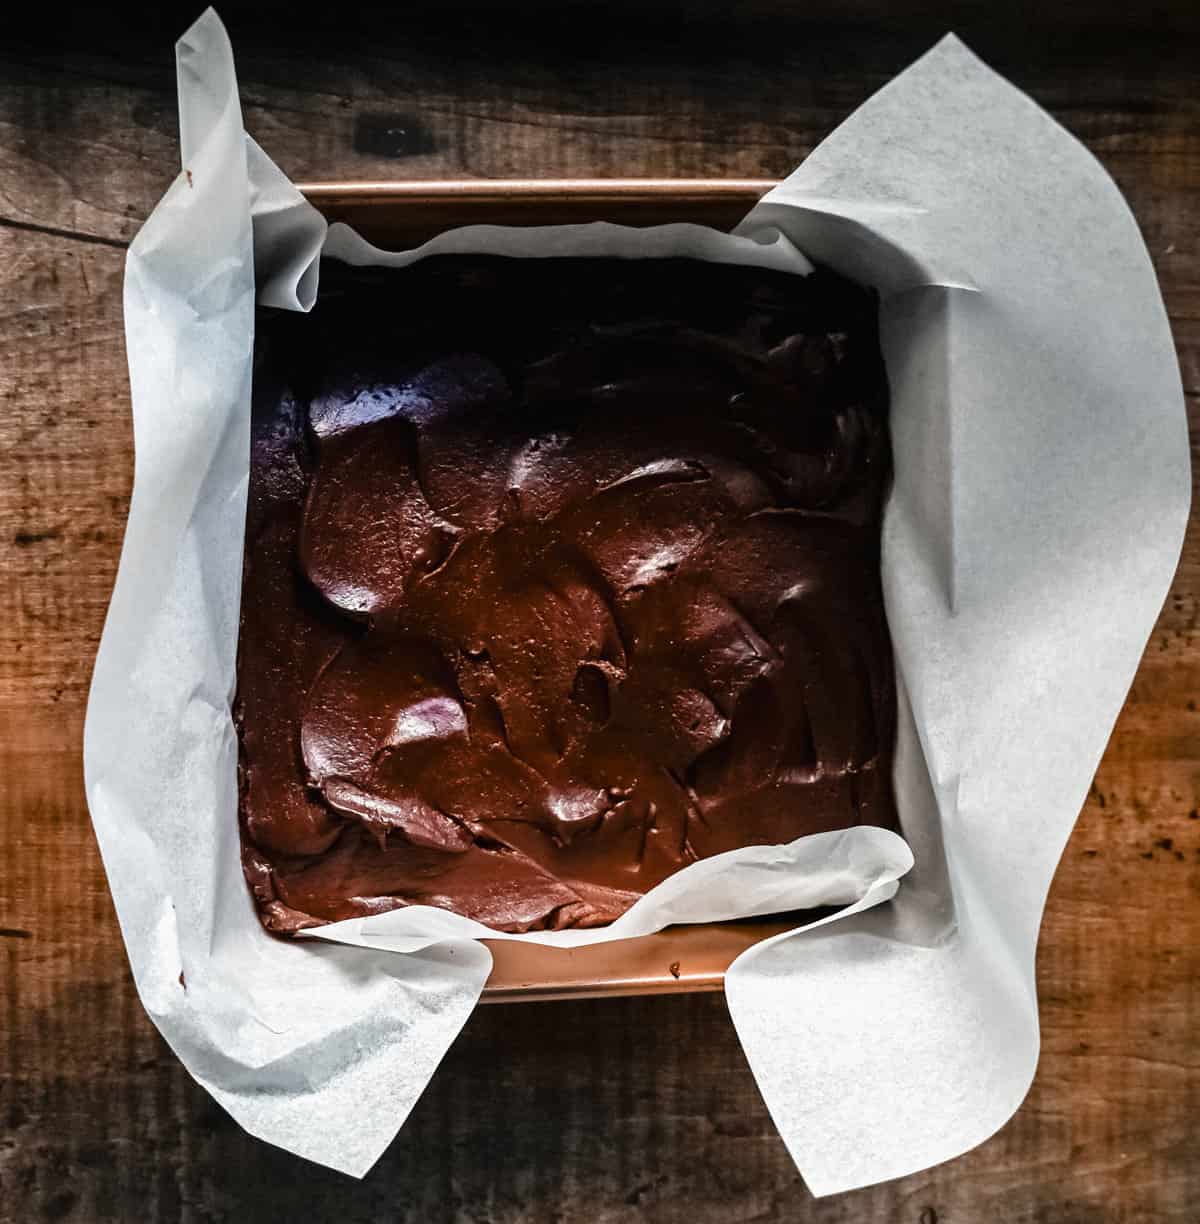 Place easy chocolate fudge in a parchment paper lined baking pan